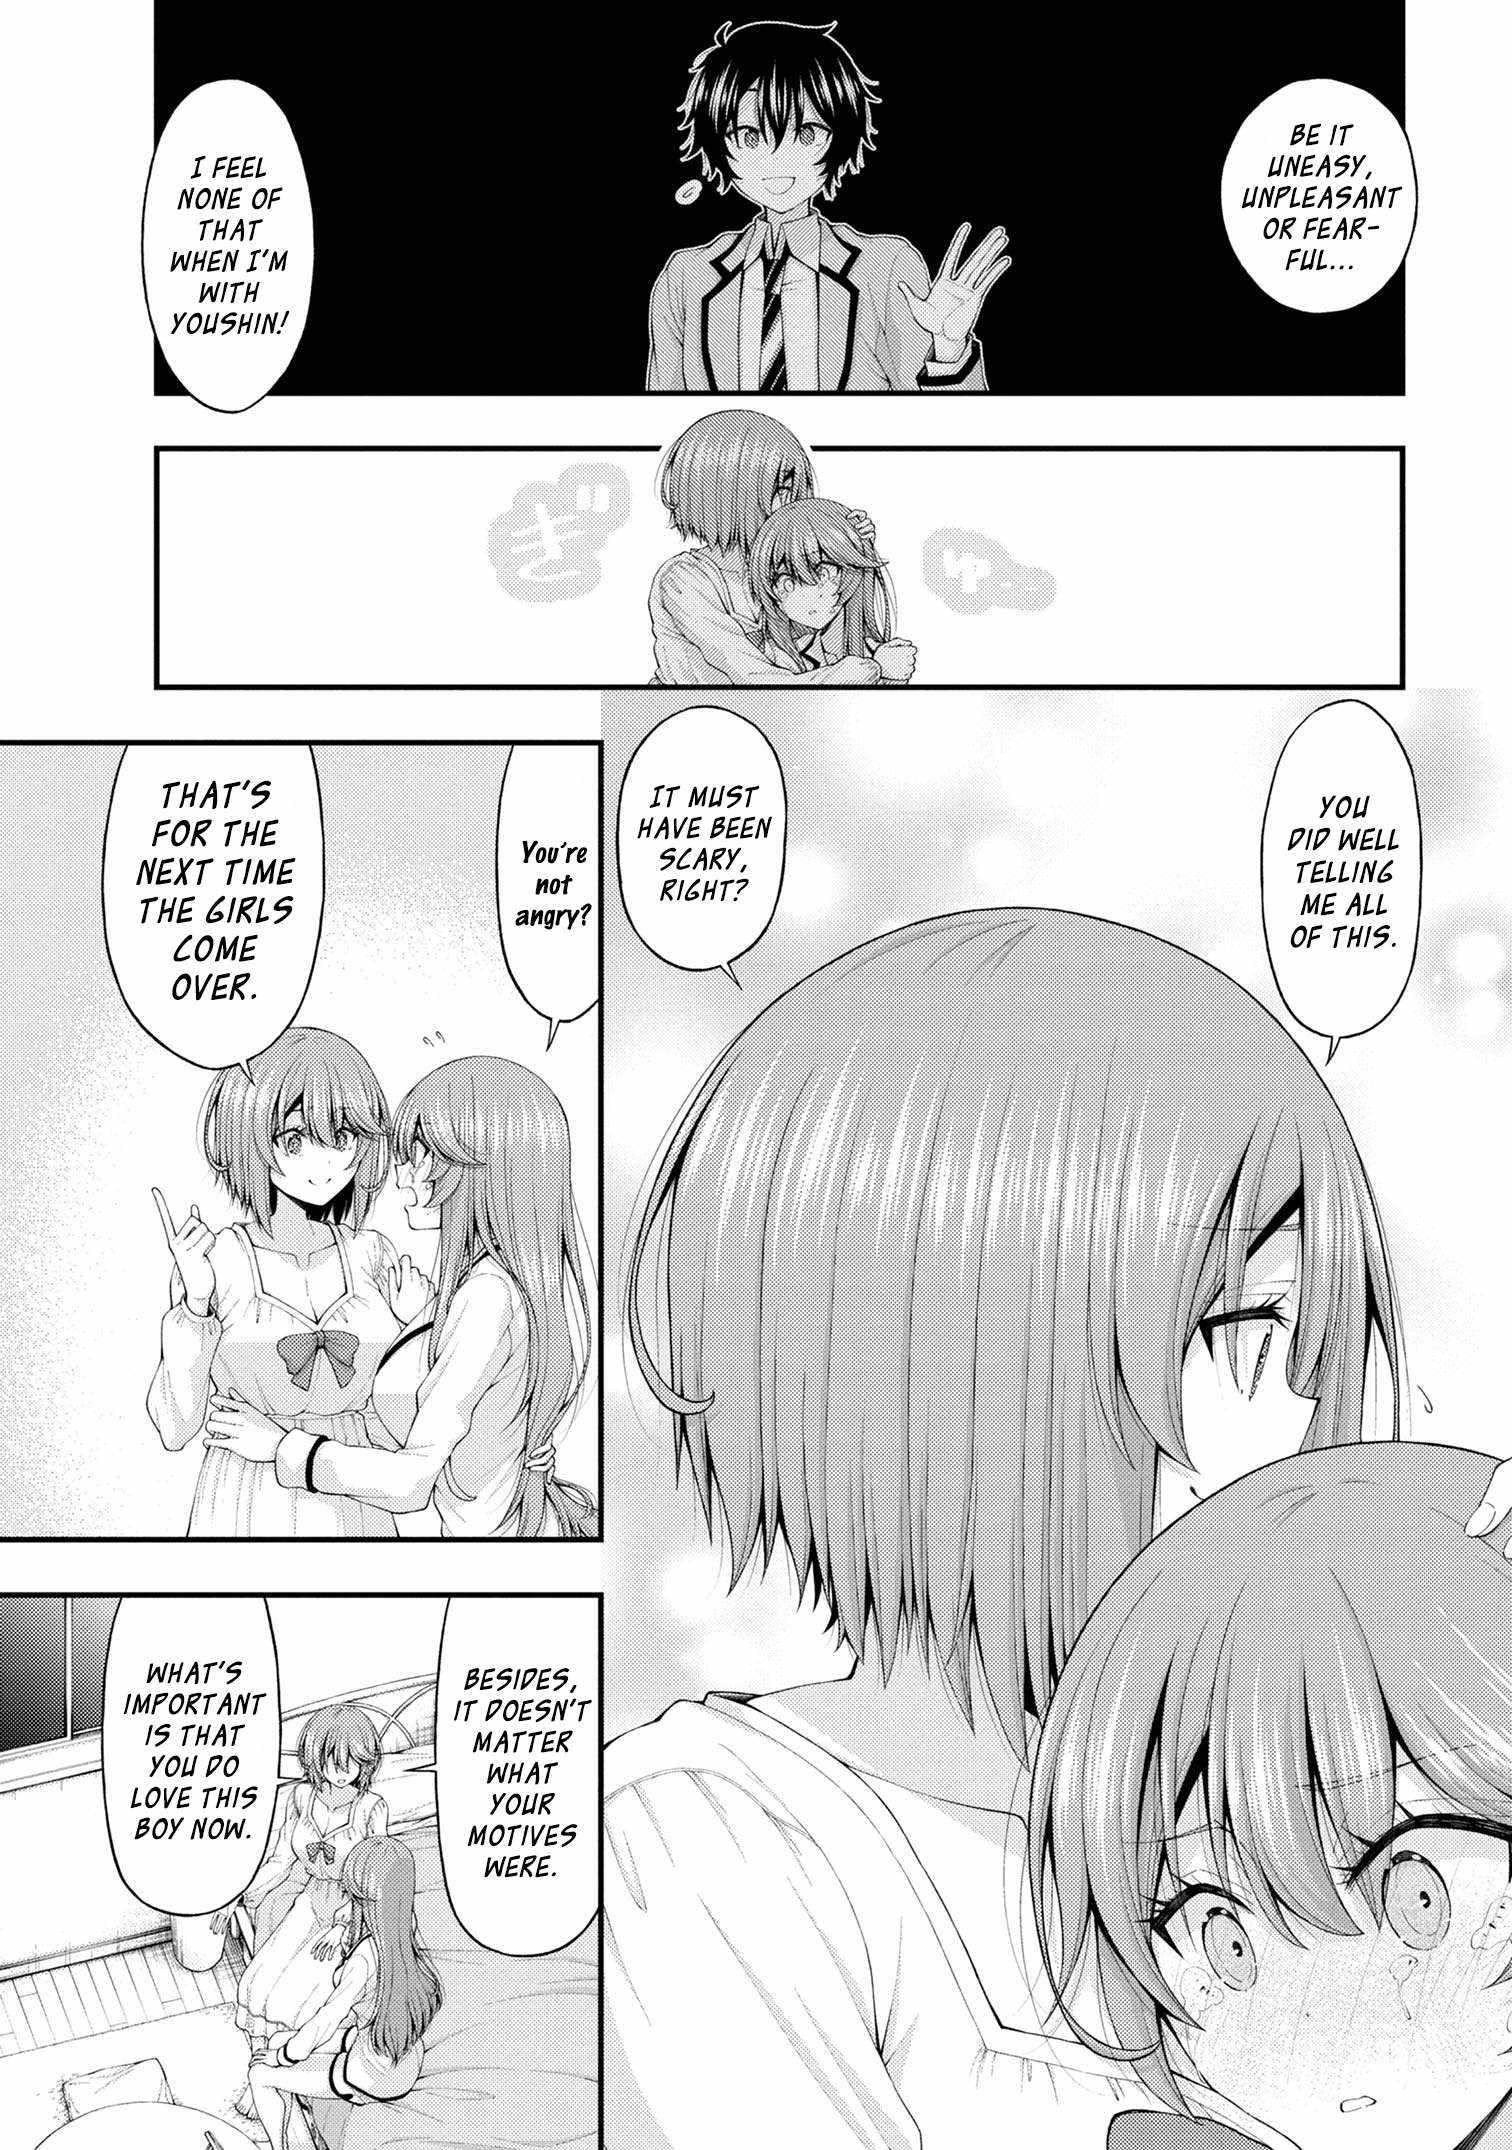 The Gal Who Was Meant to Confess to Me as a Game Punishment Has Apparently Fallen in Love with Me Chapter 12-5-eng-li - Page 20